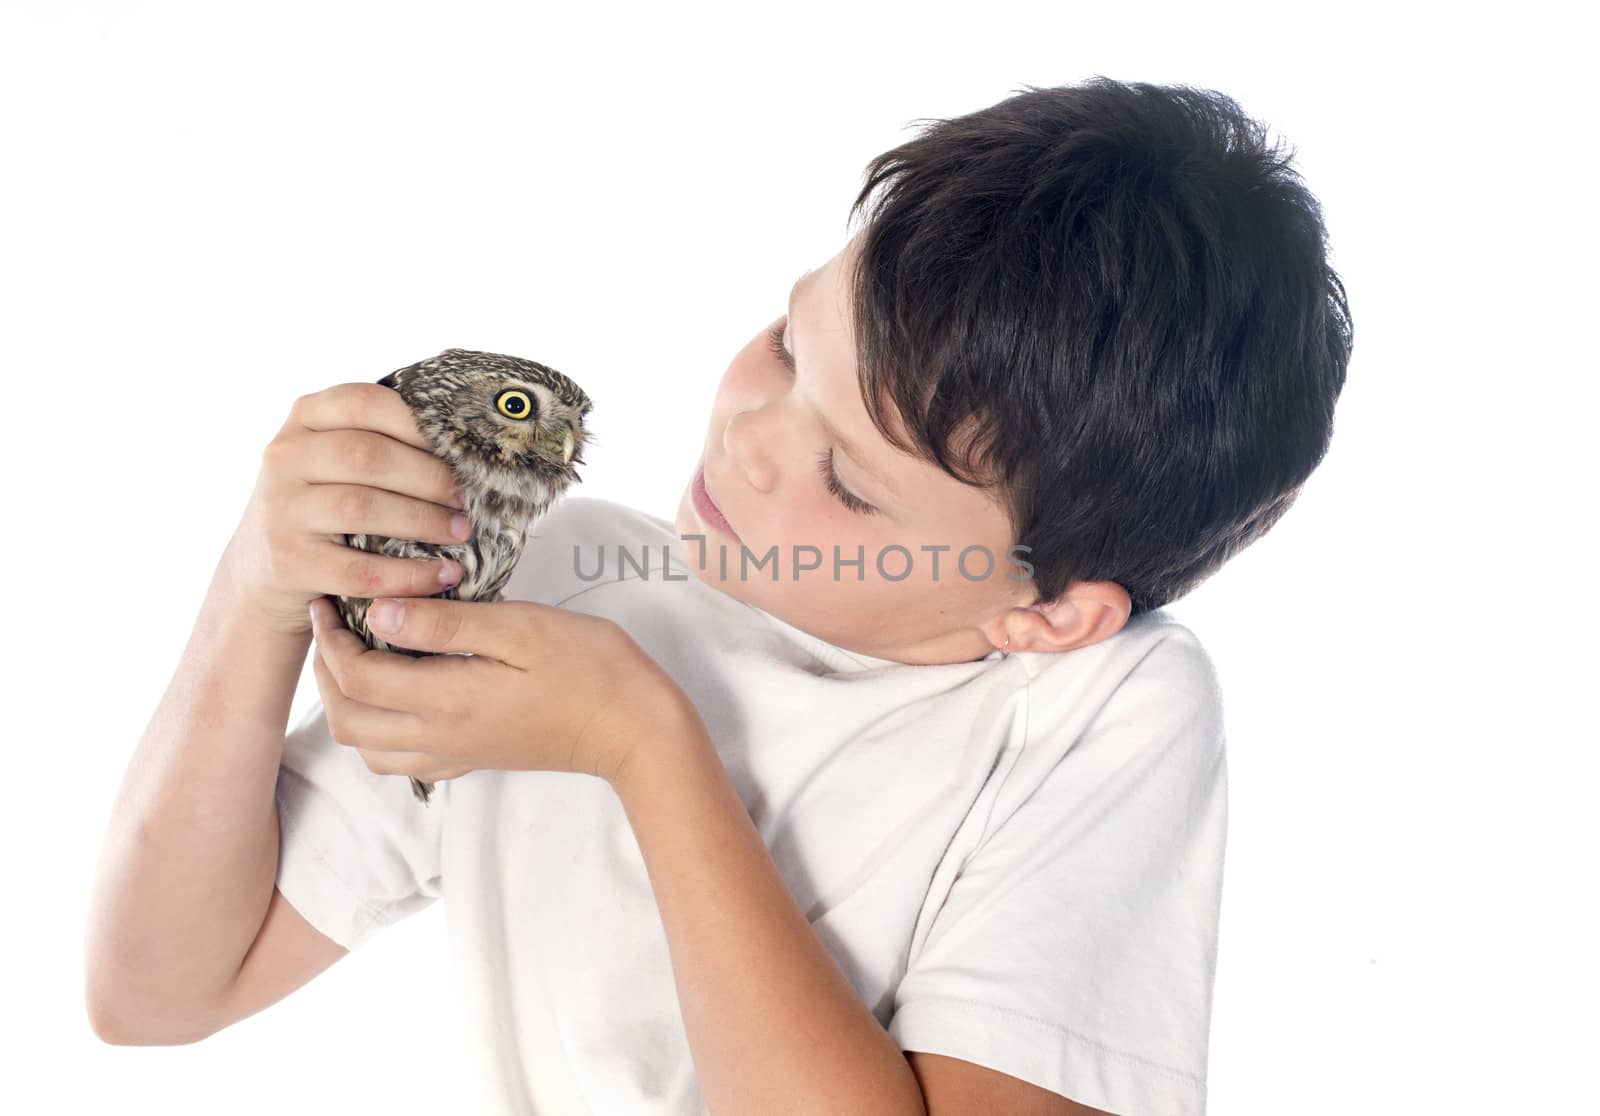 Little owl and child in front of white background